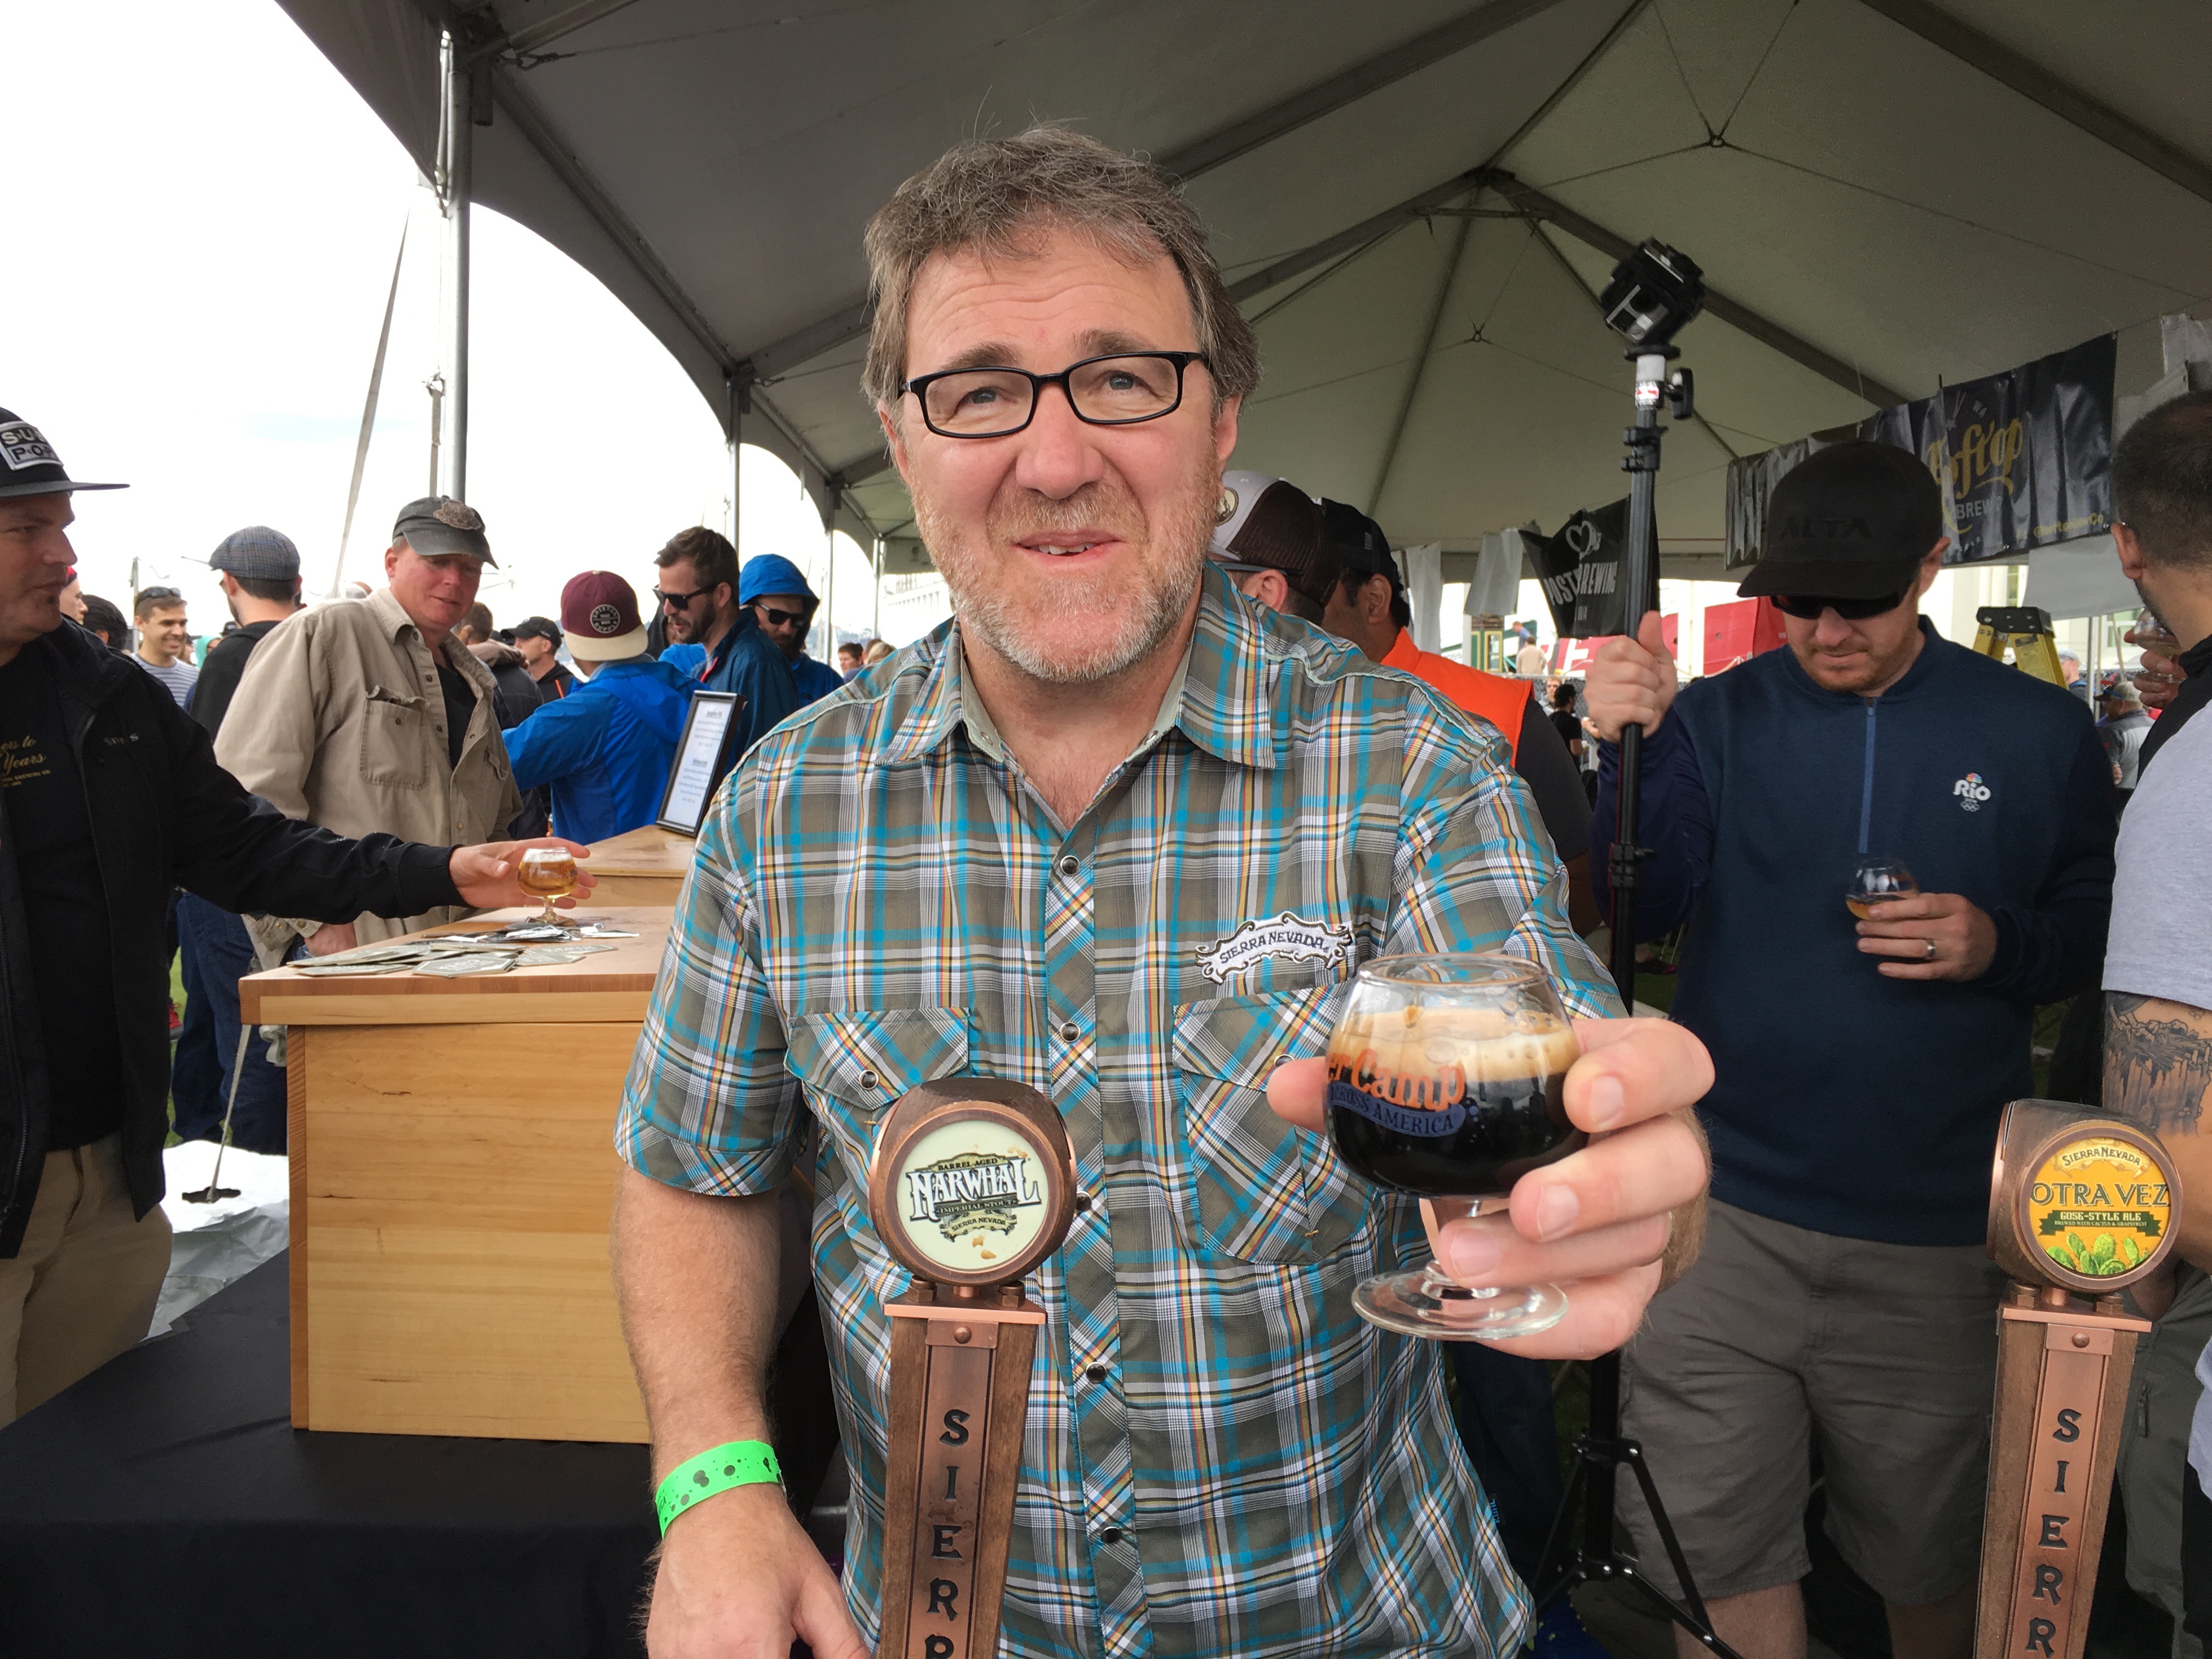 Terence Sullivan, longtime Sierra Nevada brewer, pouring a Sierra Nevada Barrel Aged Narwhal at Sierra Nevada Beer Camp Across America Festival in Seattle. (photo by D.J. Paul)